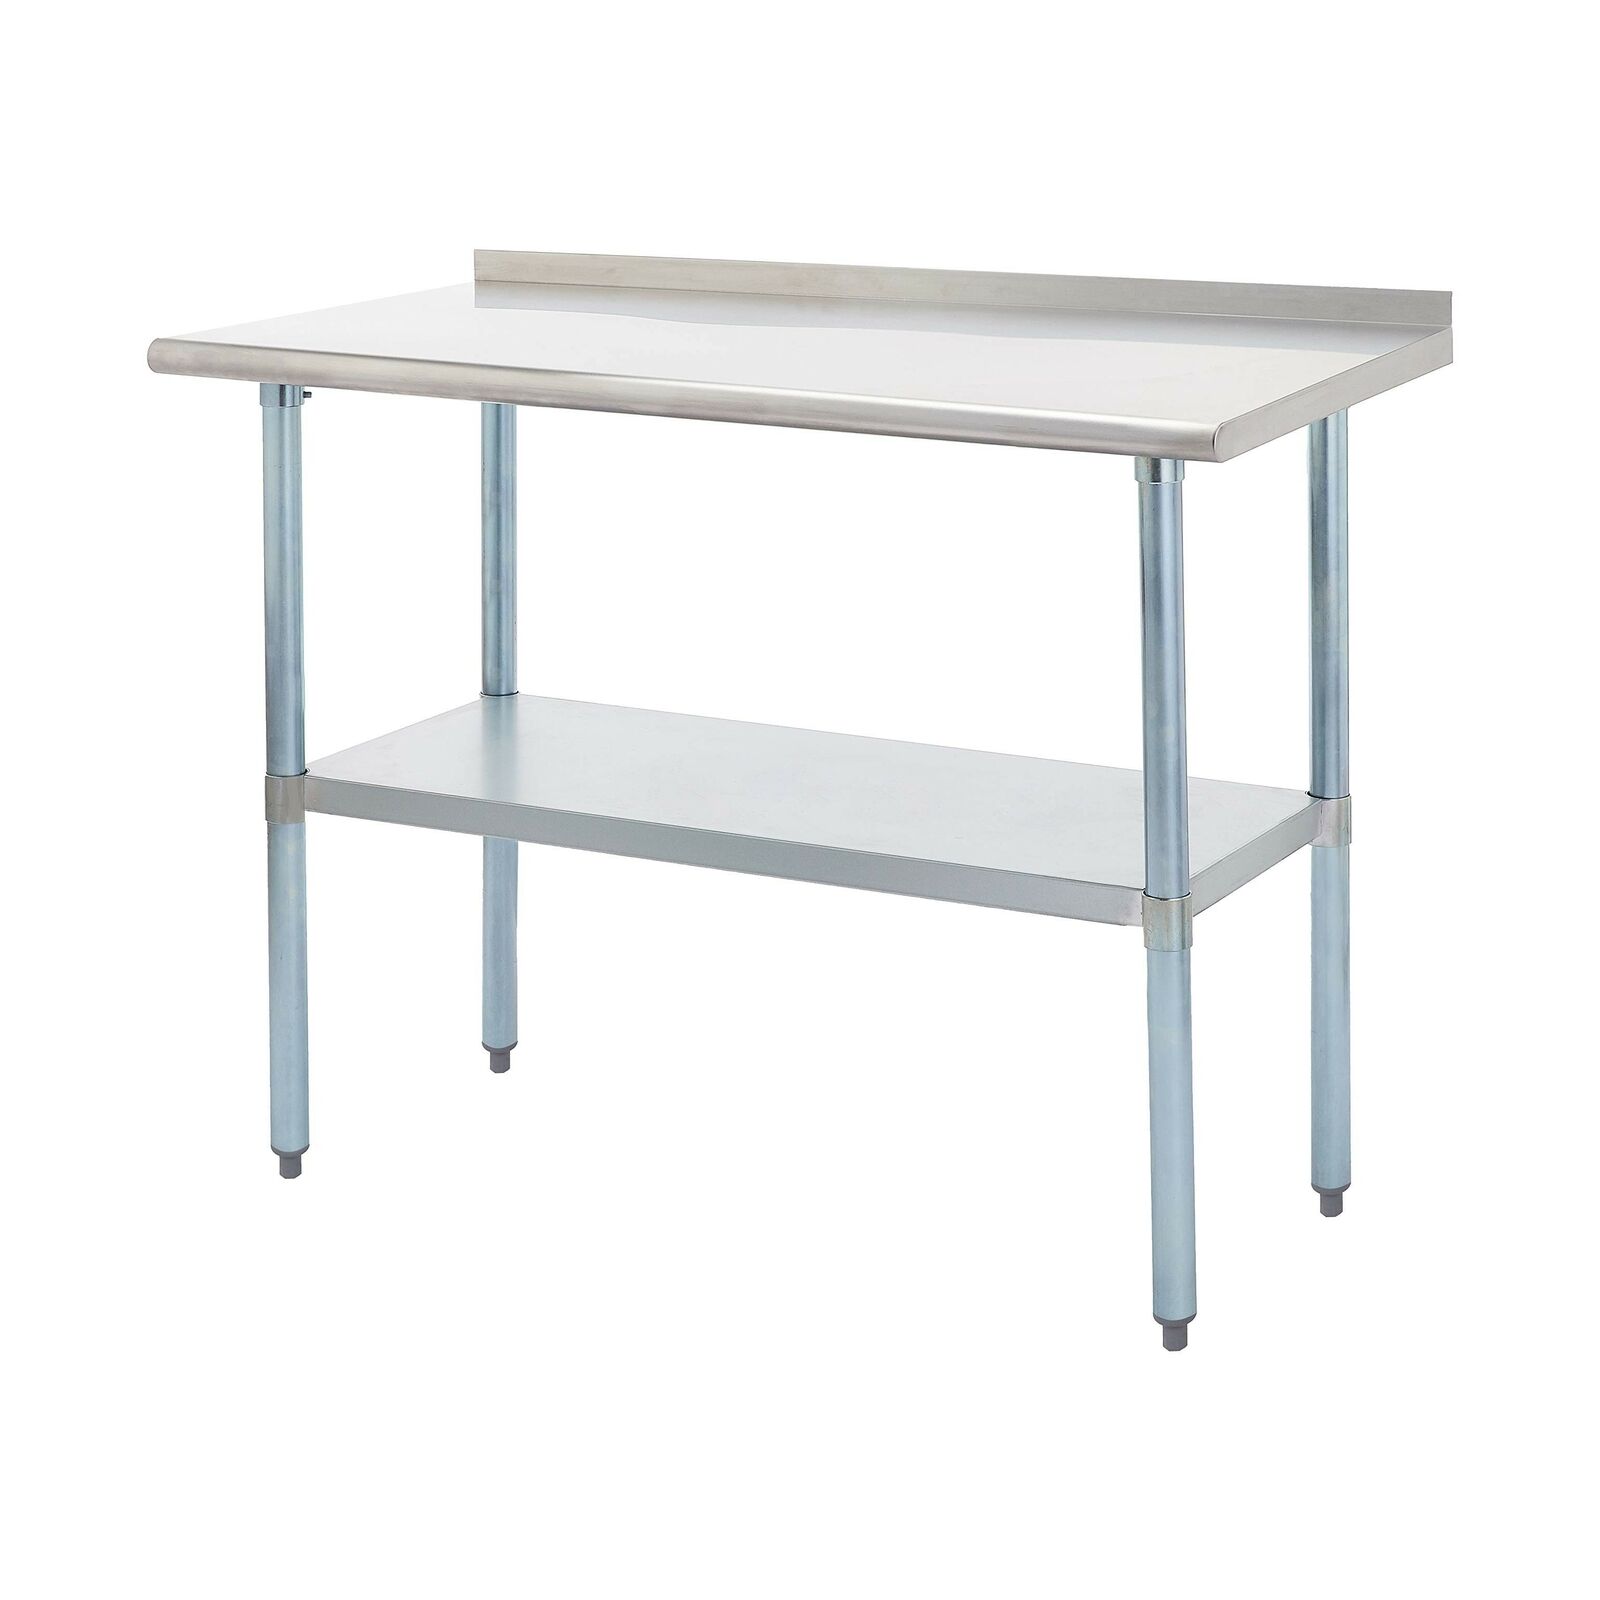 ROCKPOINT NSF Stainless Steel Commercial Kitchen Work Table with